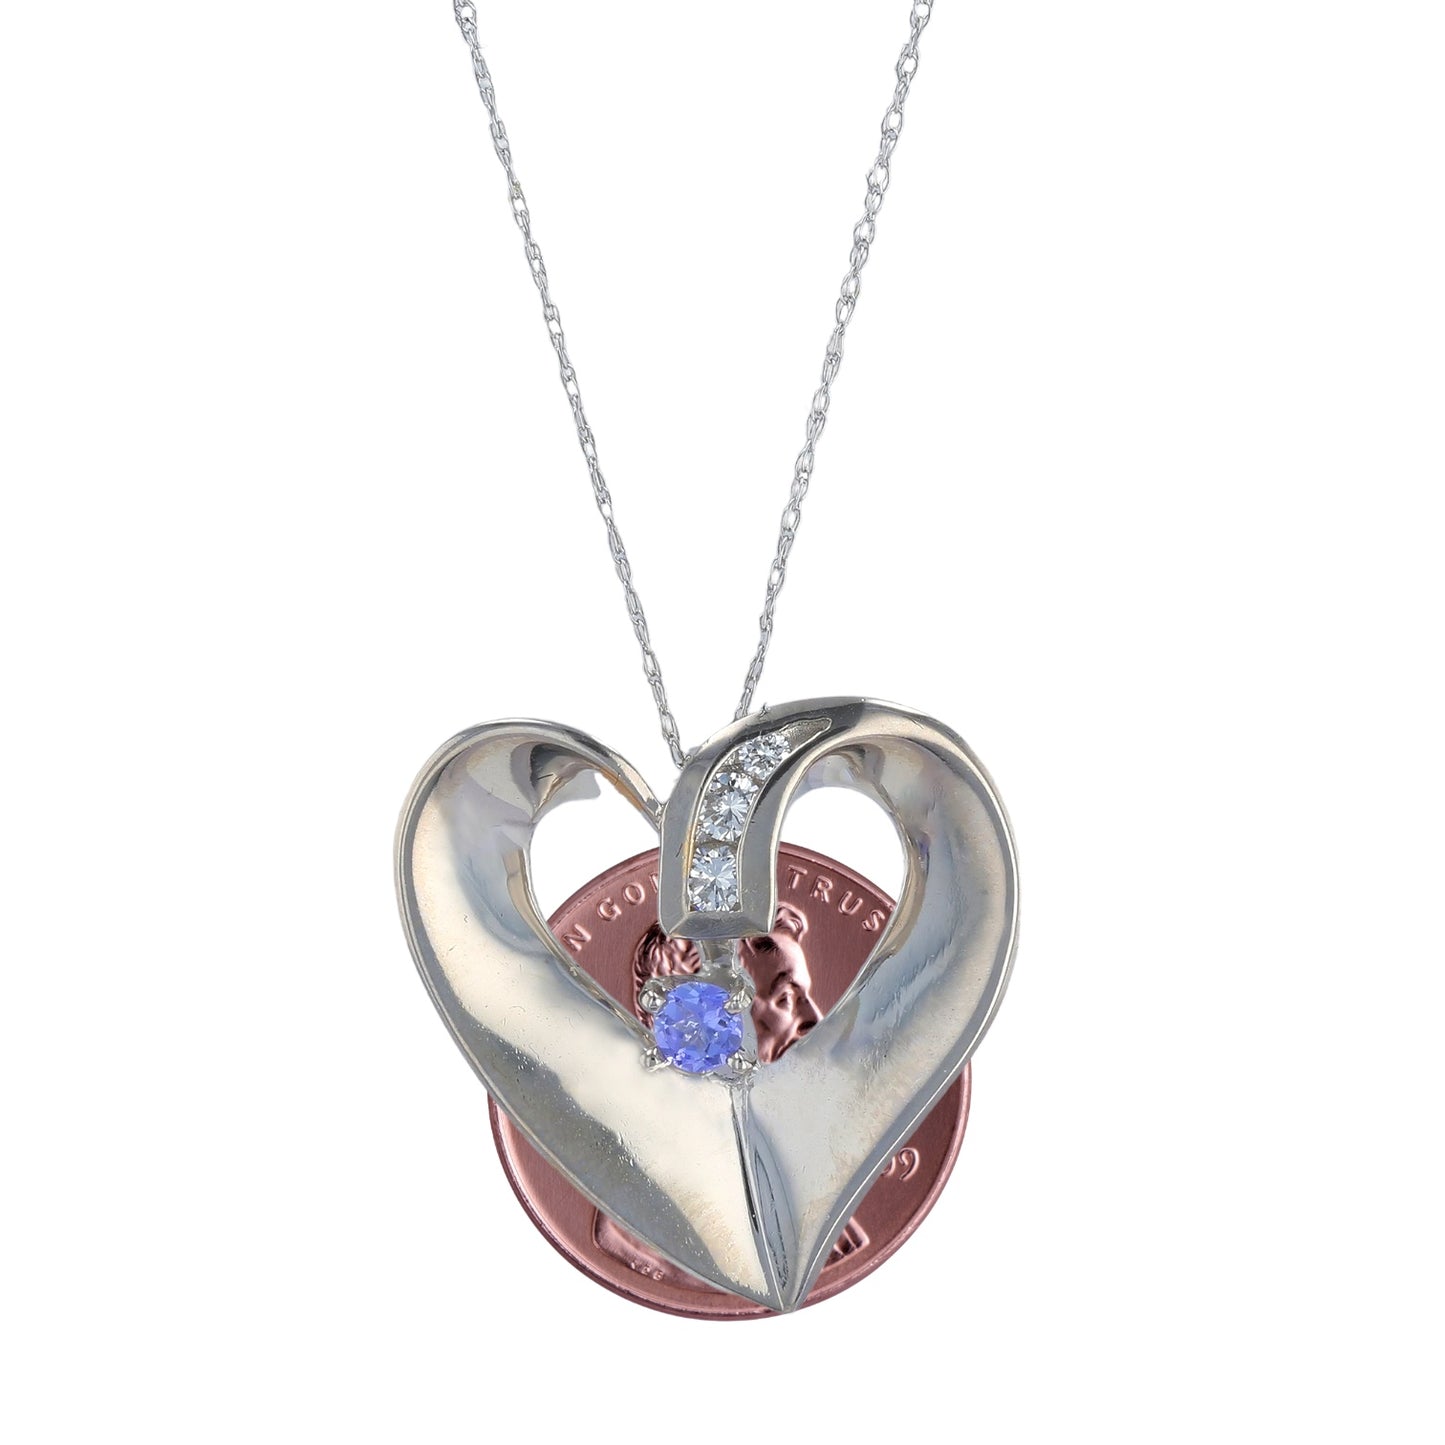 14K White Gold Heart Necklace with Diamond and Tanzanite - 11792